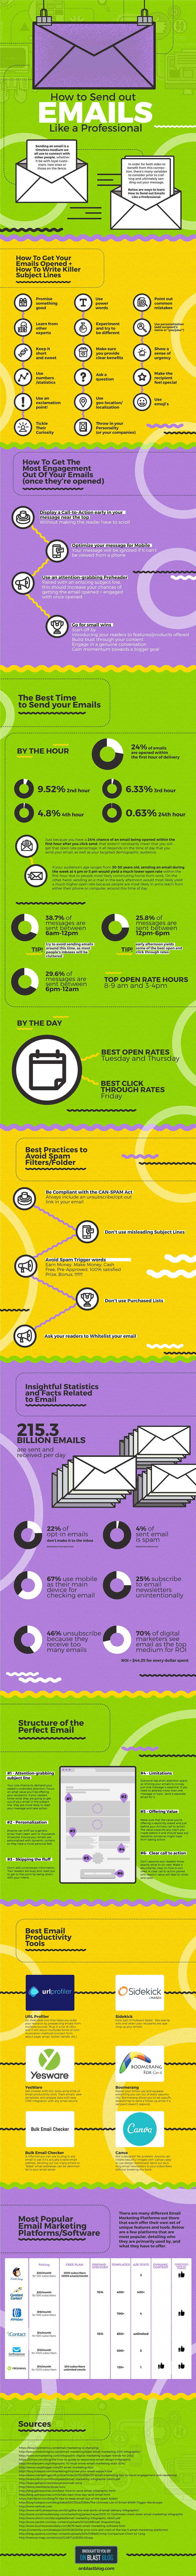 How to send emails like a professional - Infographic